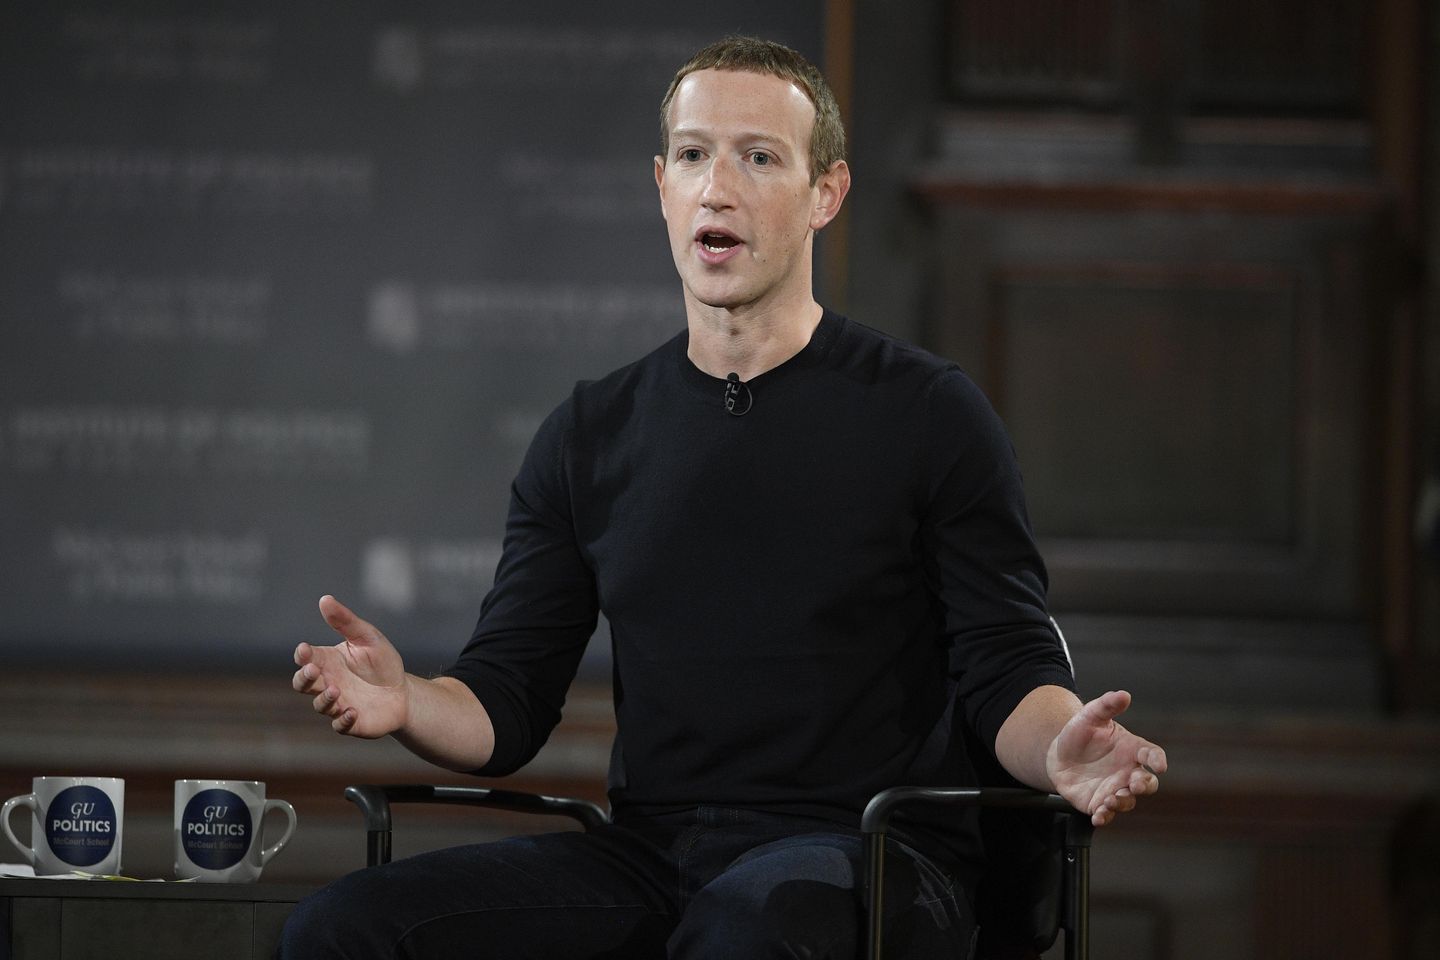 Mark Zuckerberg says in-person engineers advance at a better pace than remote workers